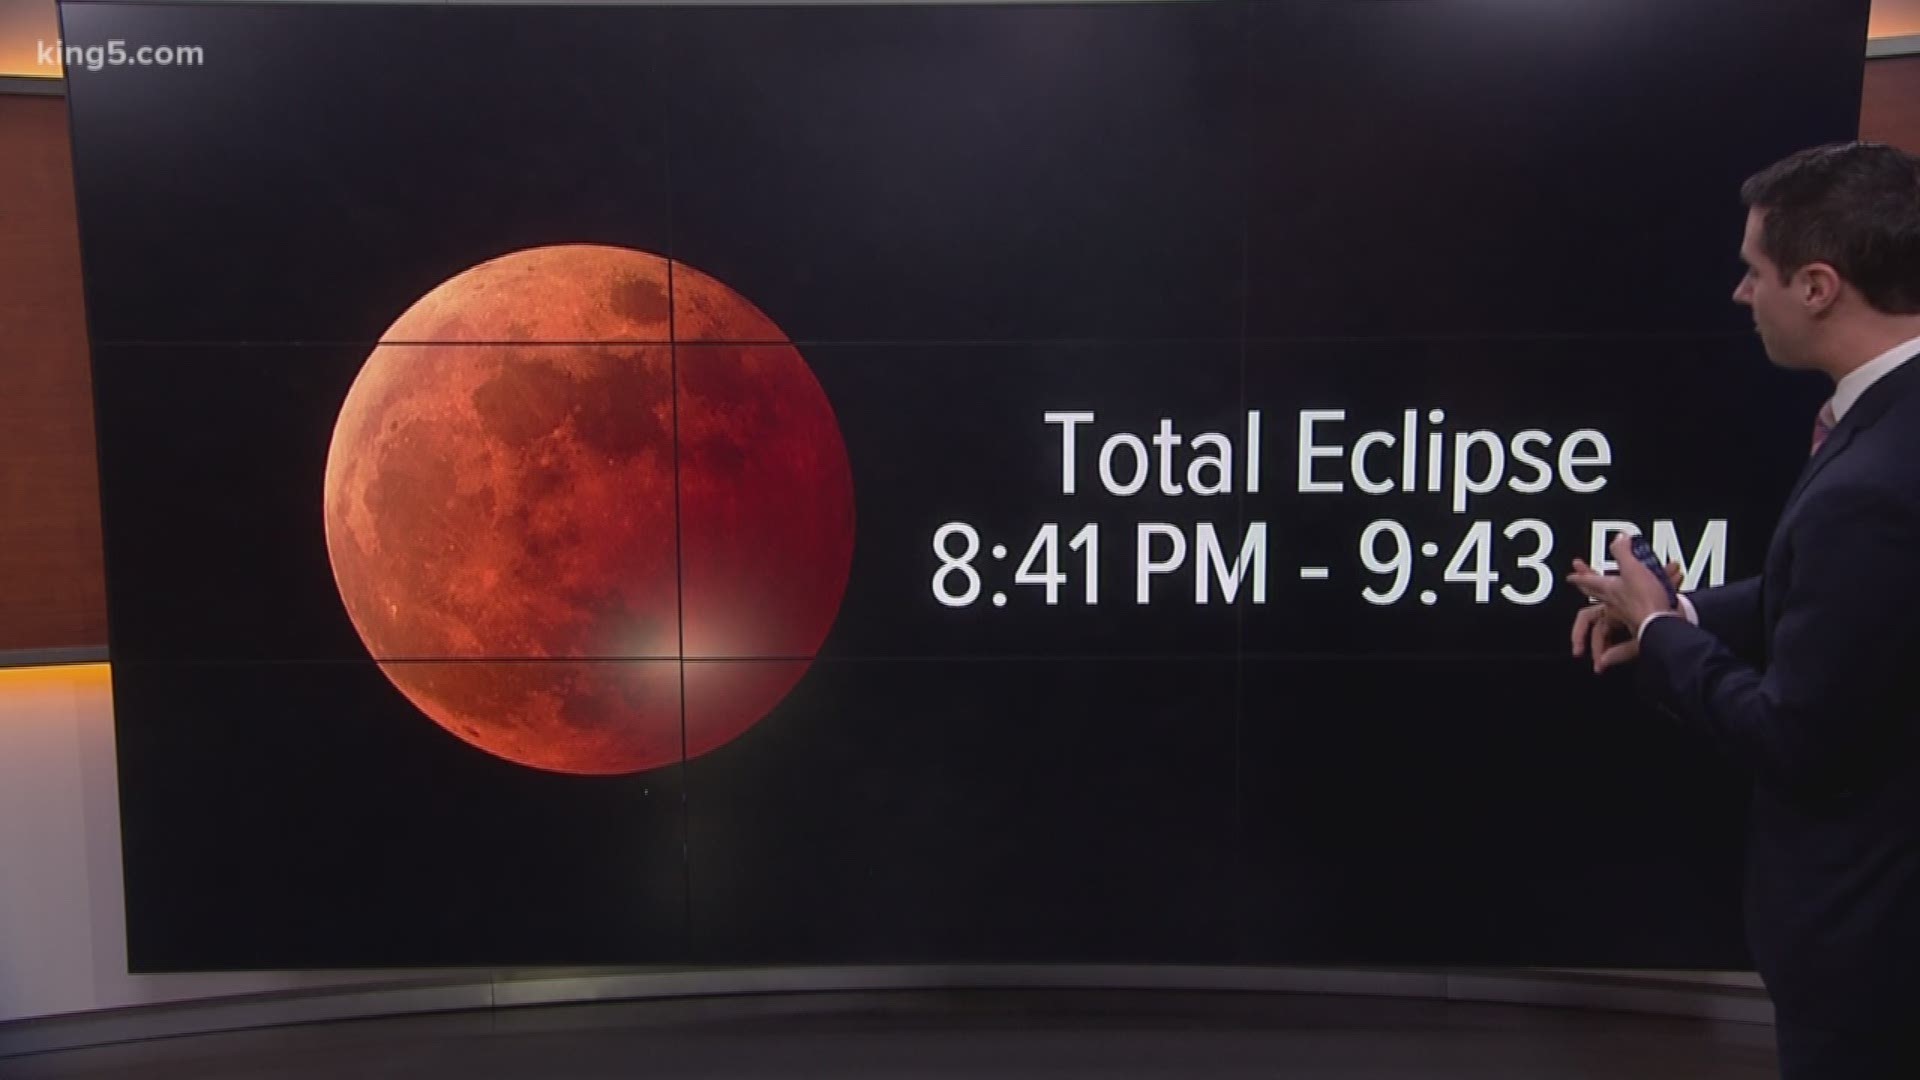 KING 5 Meteorologist Ben Dery explains when to look for the supermoon eclipse.